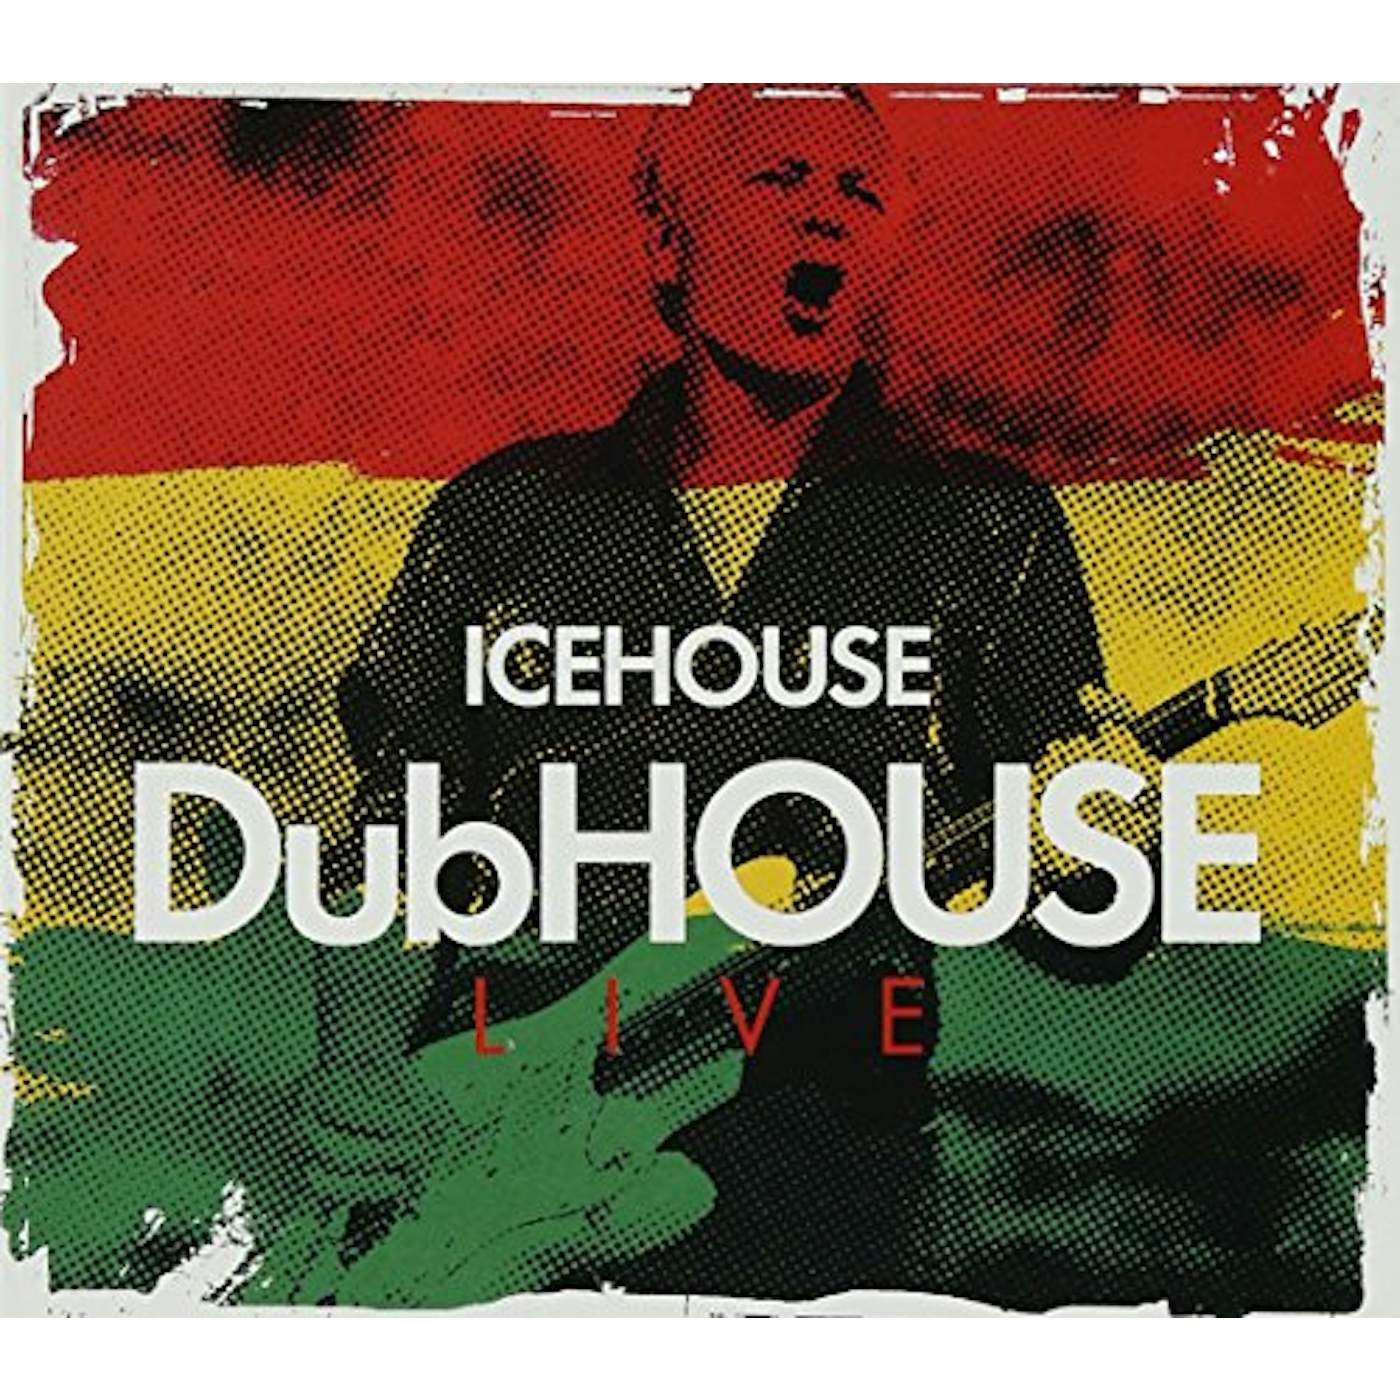 ICEHOUSE DUBHOUSE: LIVE CD